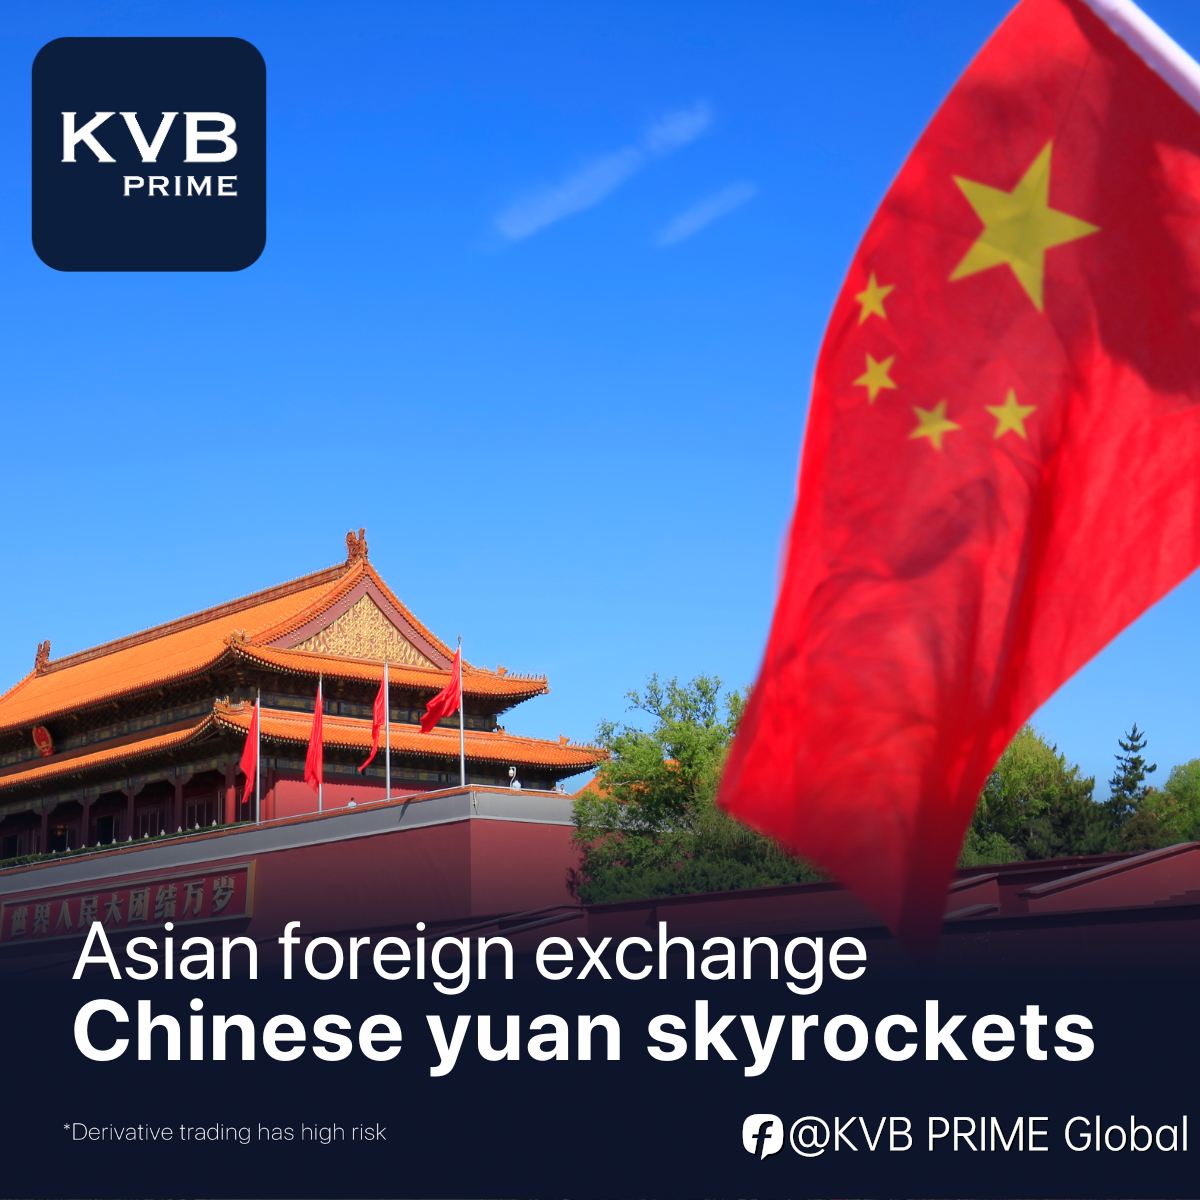 Asia's foreign exchange (FX) market sees a rise, with the Chinese yuan surging amidst intervention reports